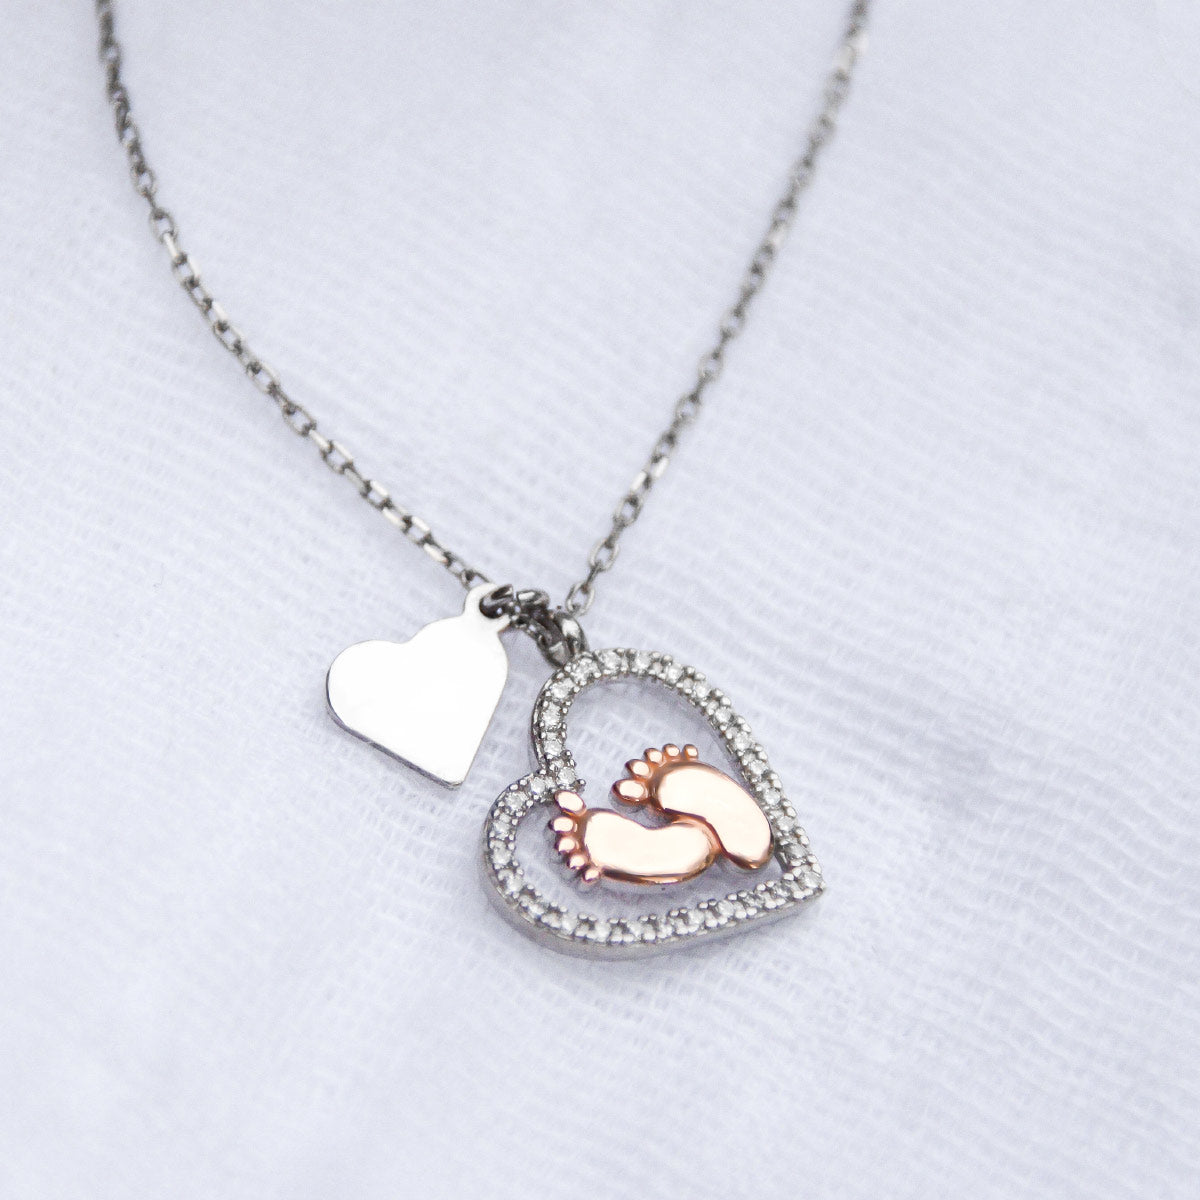 Hi Grandma, I Can't Wait to Meet You - Baby Feet Heart Necklace Gift Set